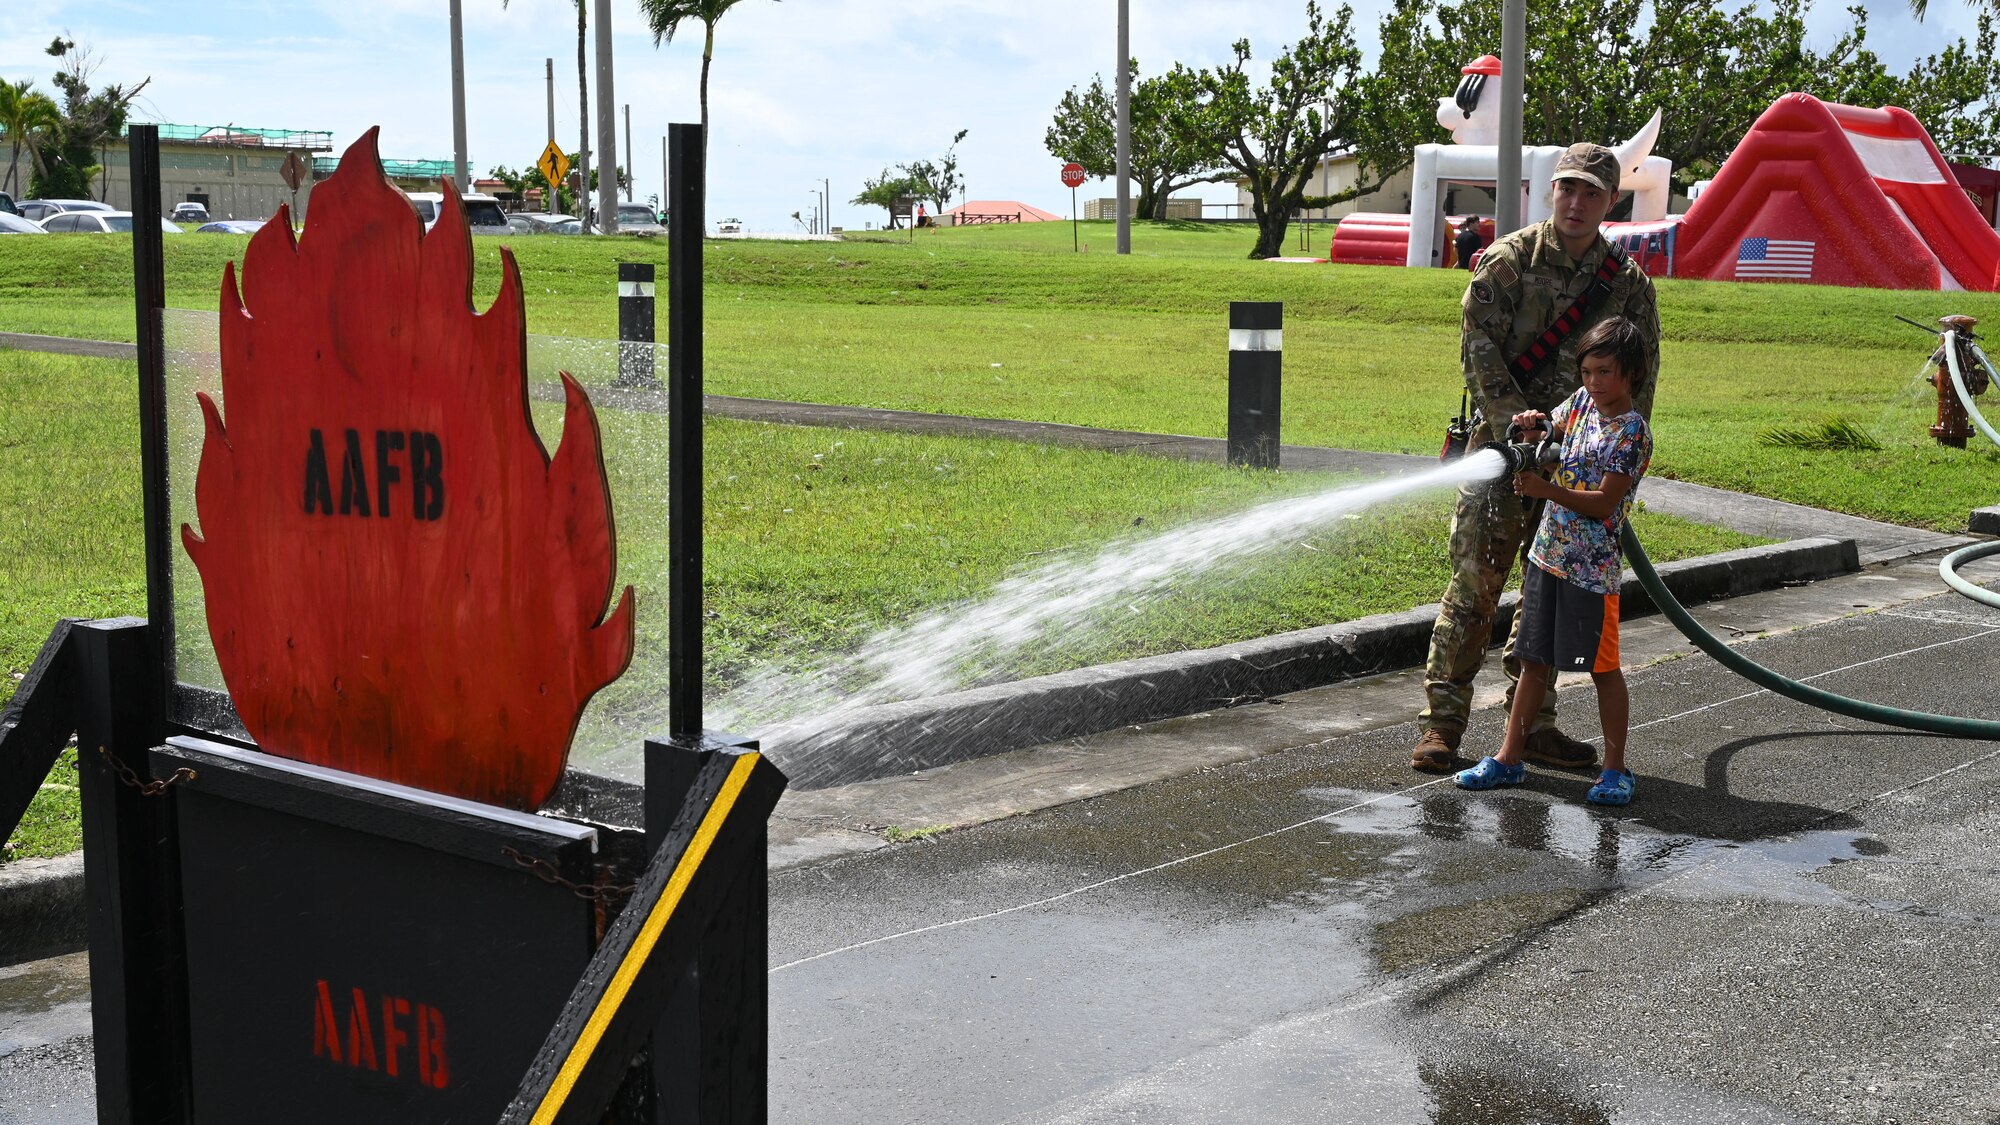 An Airman assists a child with spraying water from a water hose to a simulated fire.